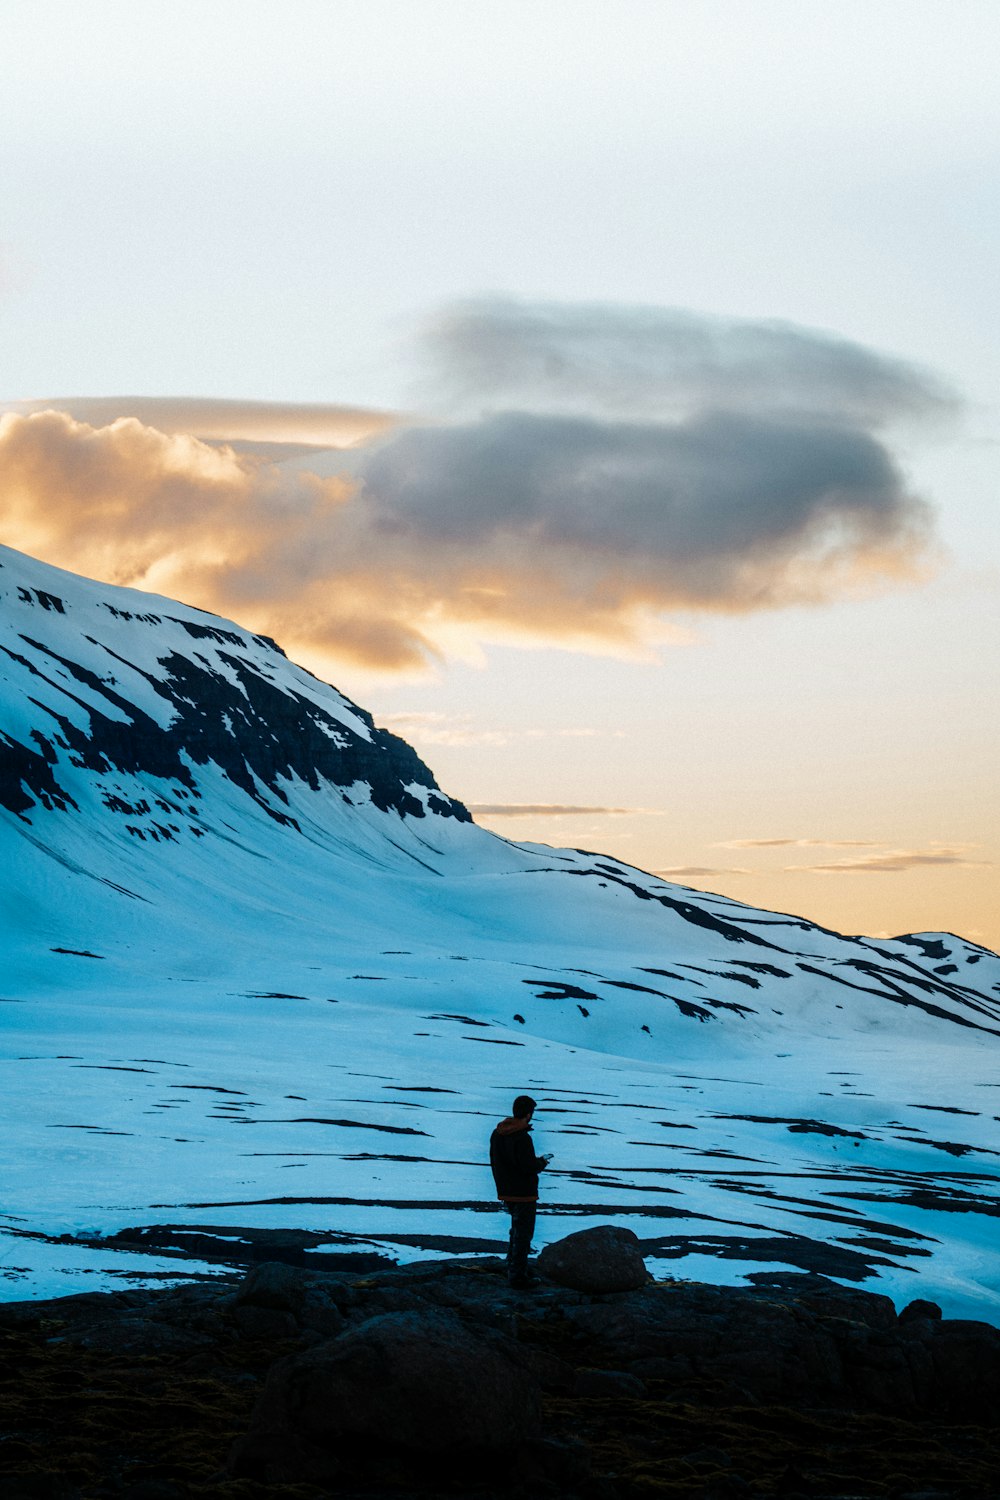 person standing on snow covered mountain during daytime